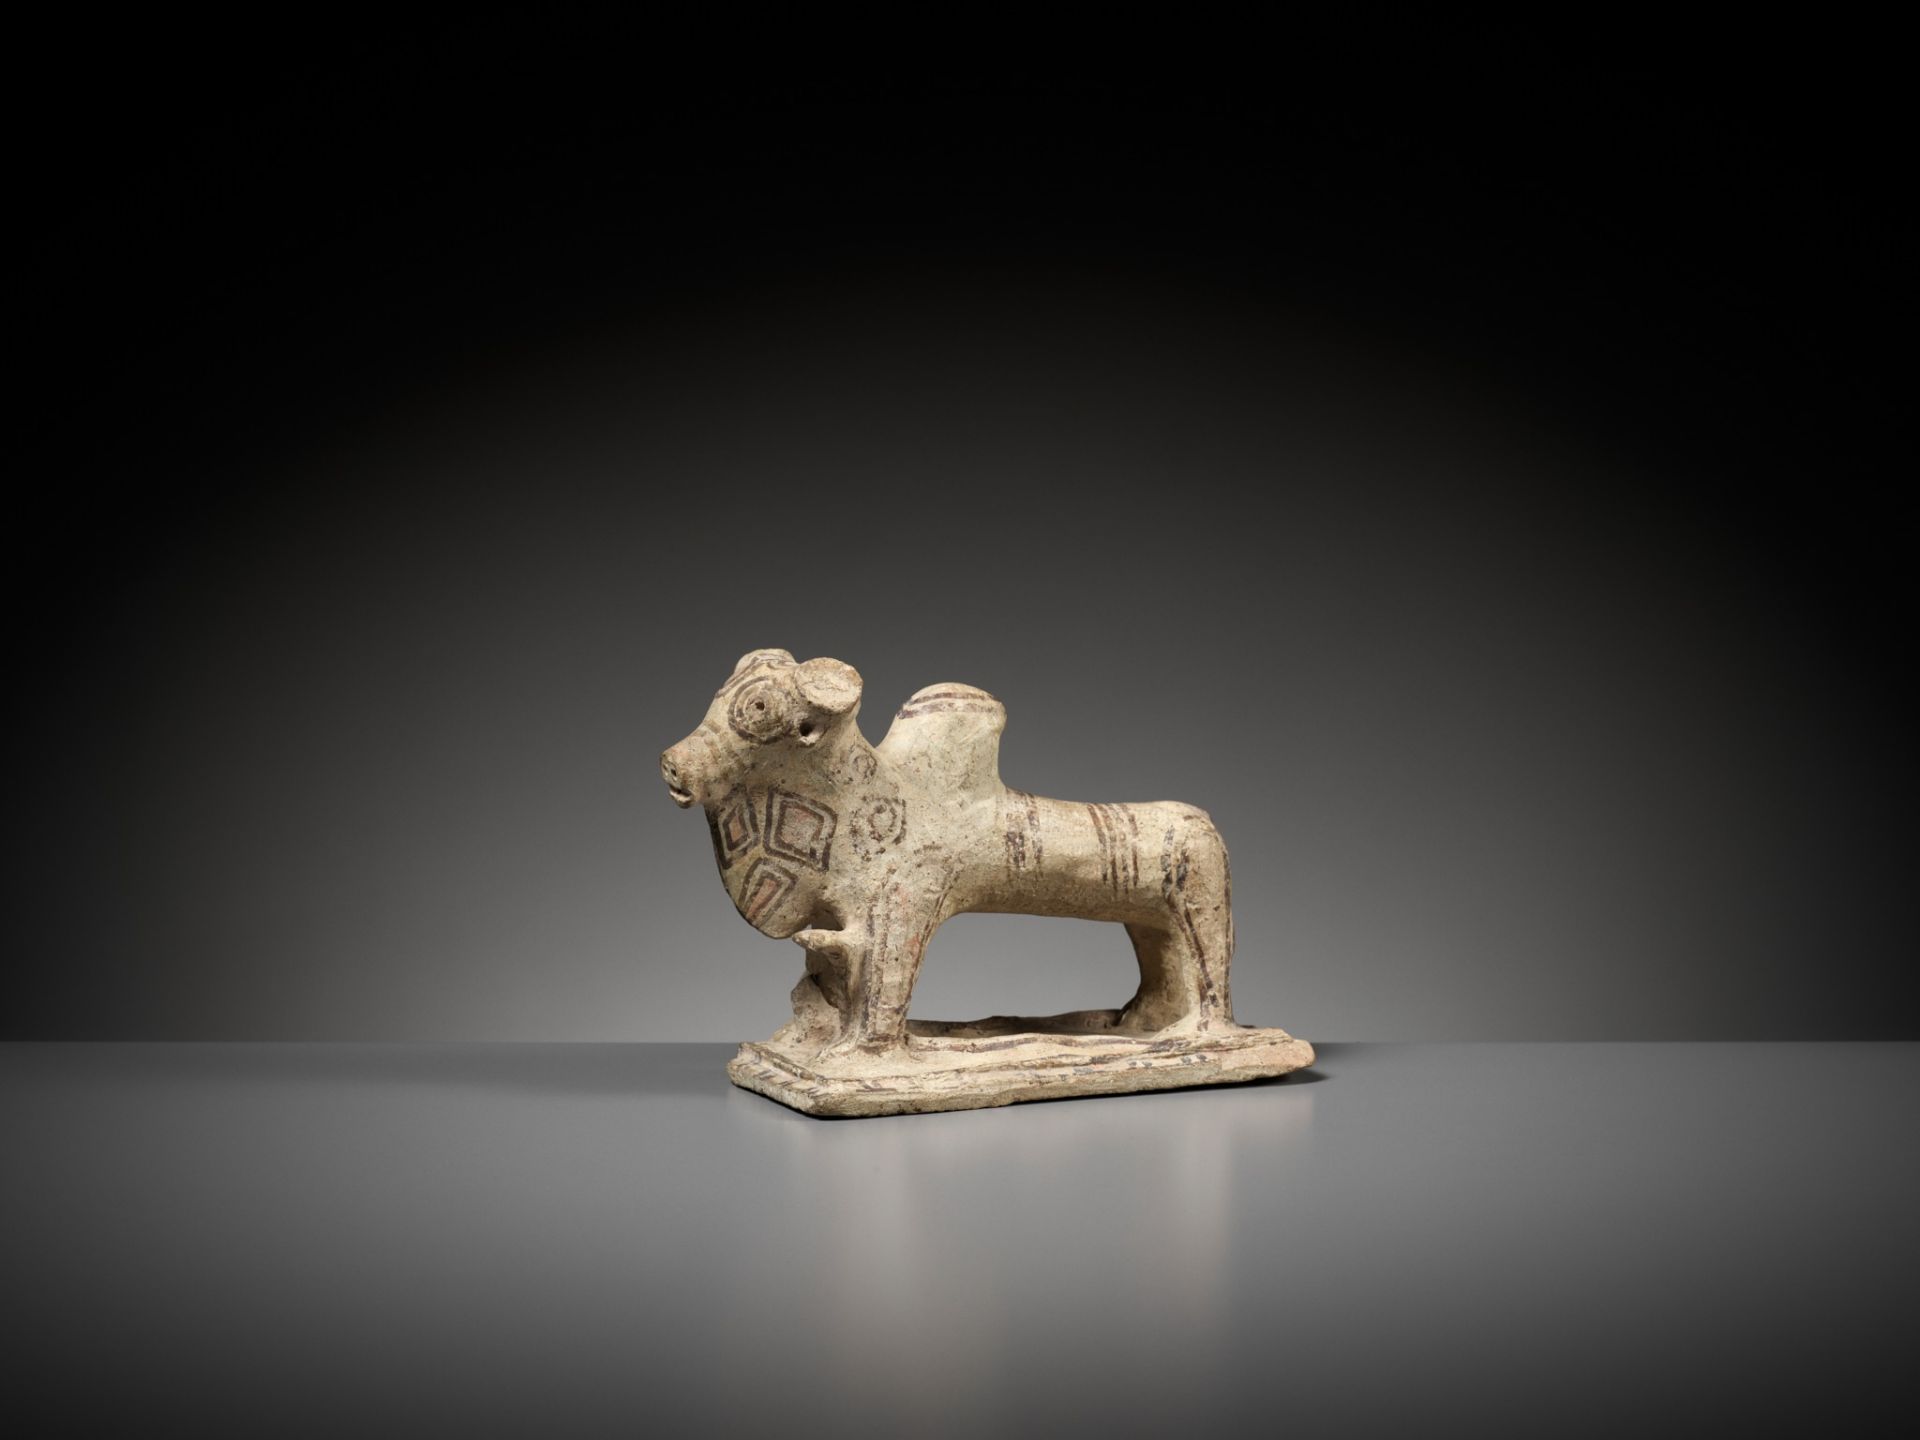 A PAINTED TERRACOTTA FIGURE OF A HUMPED OX, MOHENJO-DARO - Image 7 of 12